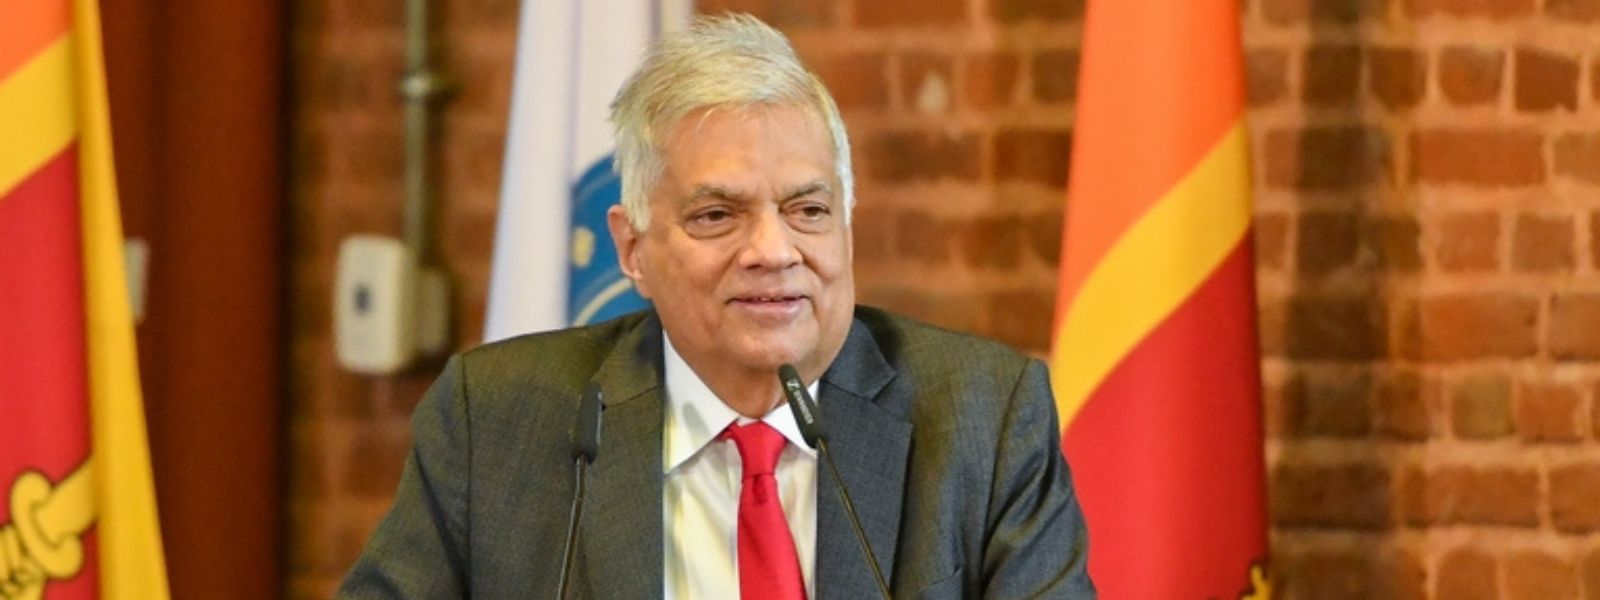 Ranil to press ahead with 13A; Expected to address Parliament next week